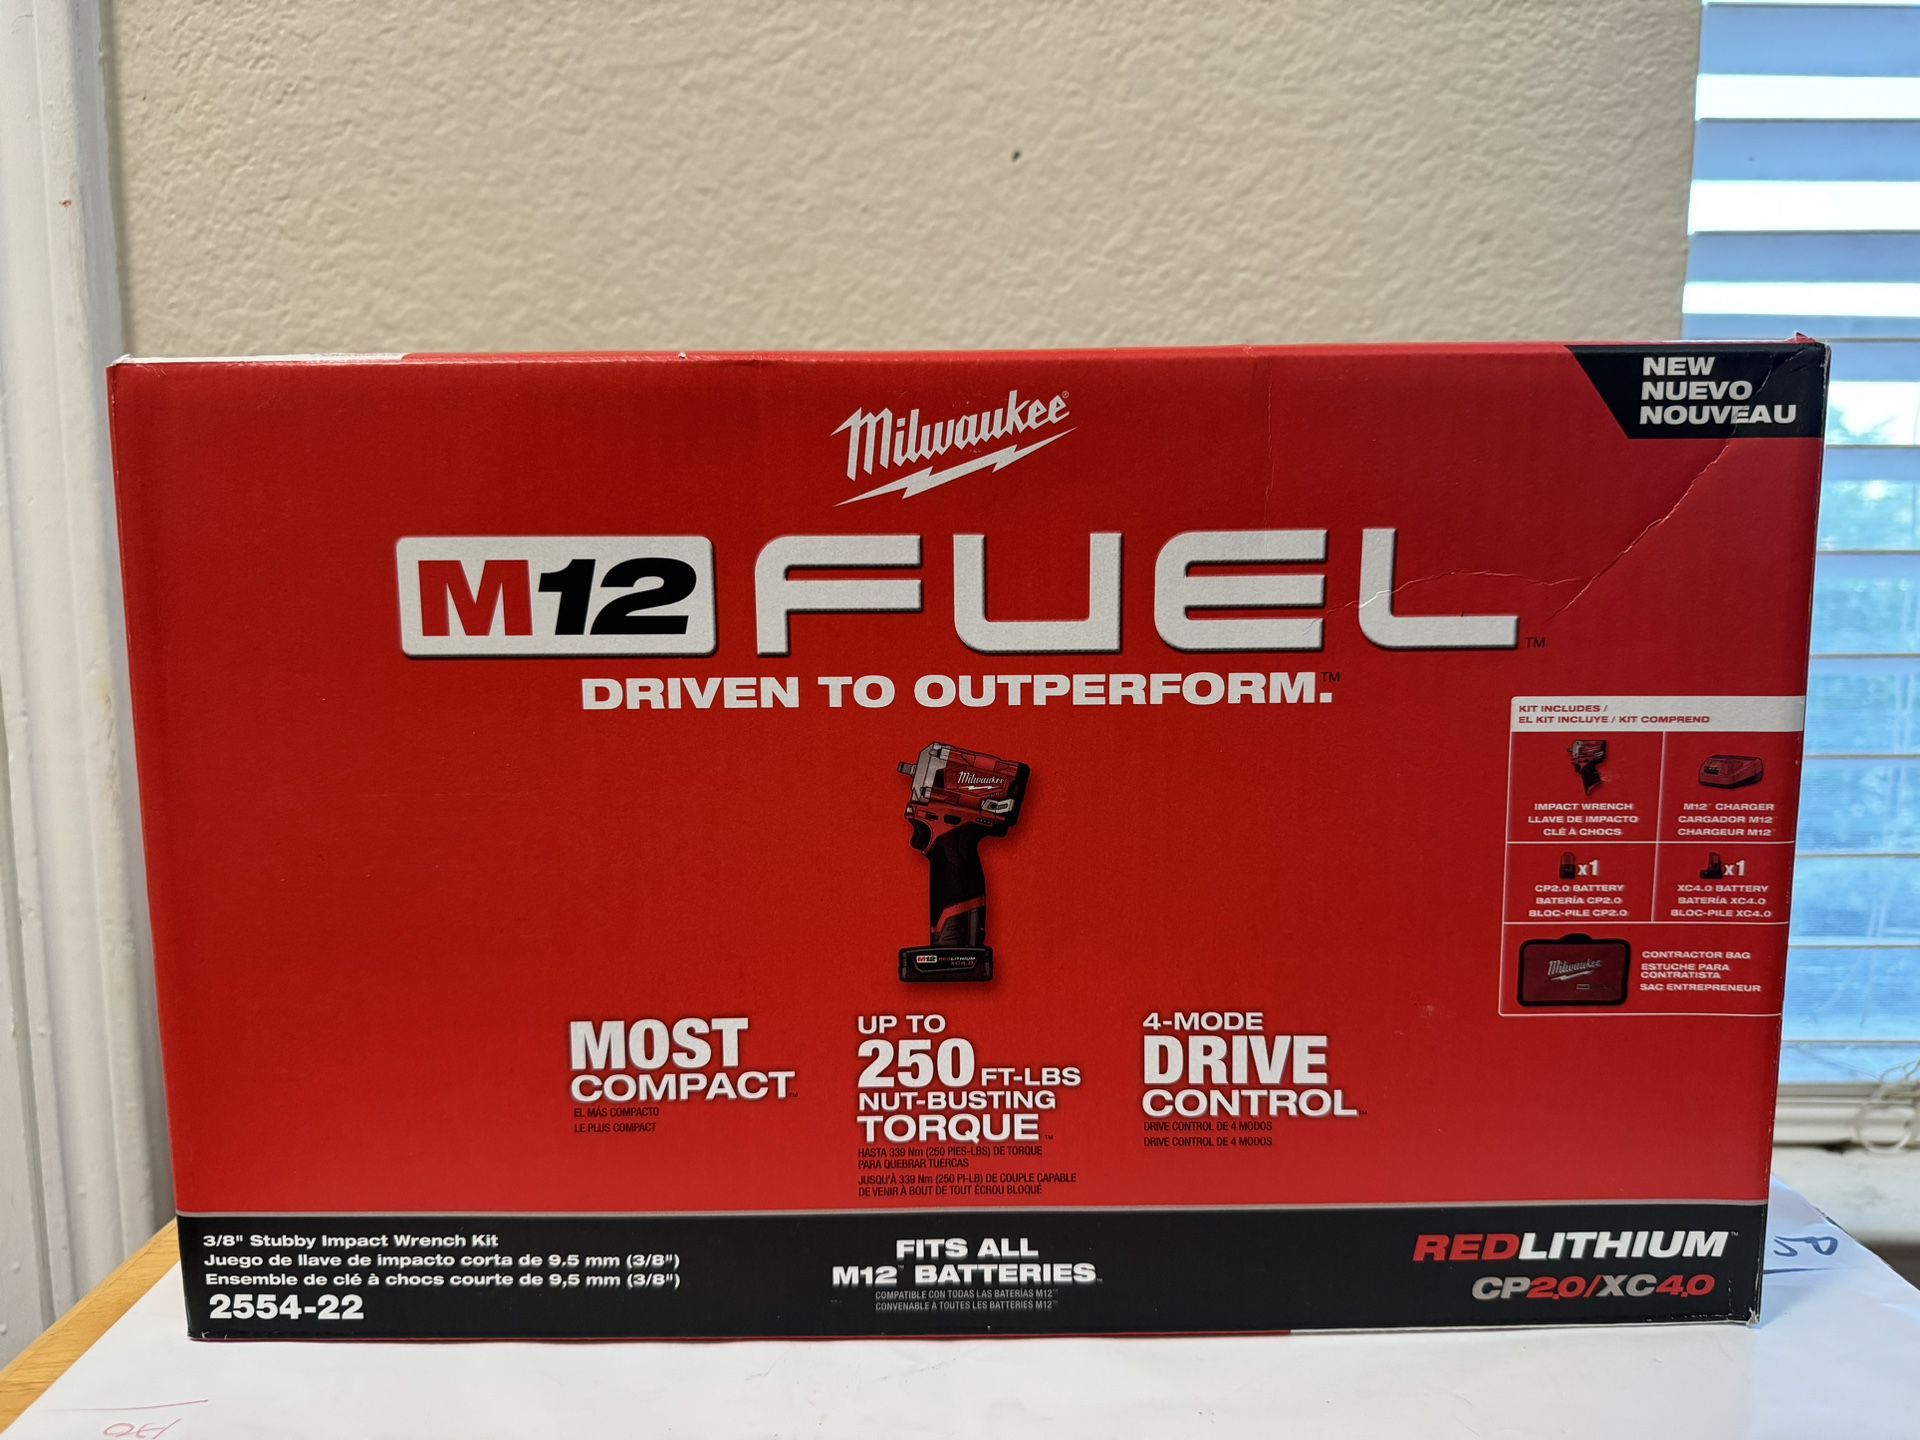 M12 FUEL 12V Lithium-Ion Brushless Cordless Stubby 3/8 in. Impact Wrench Kit with One 4.0 and One 2.